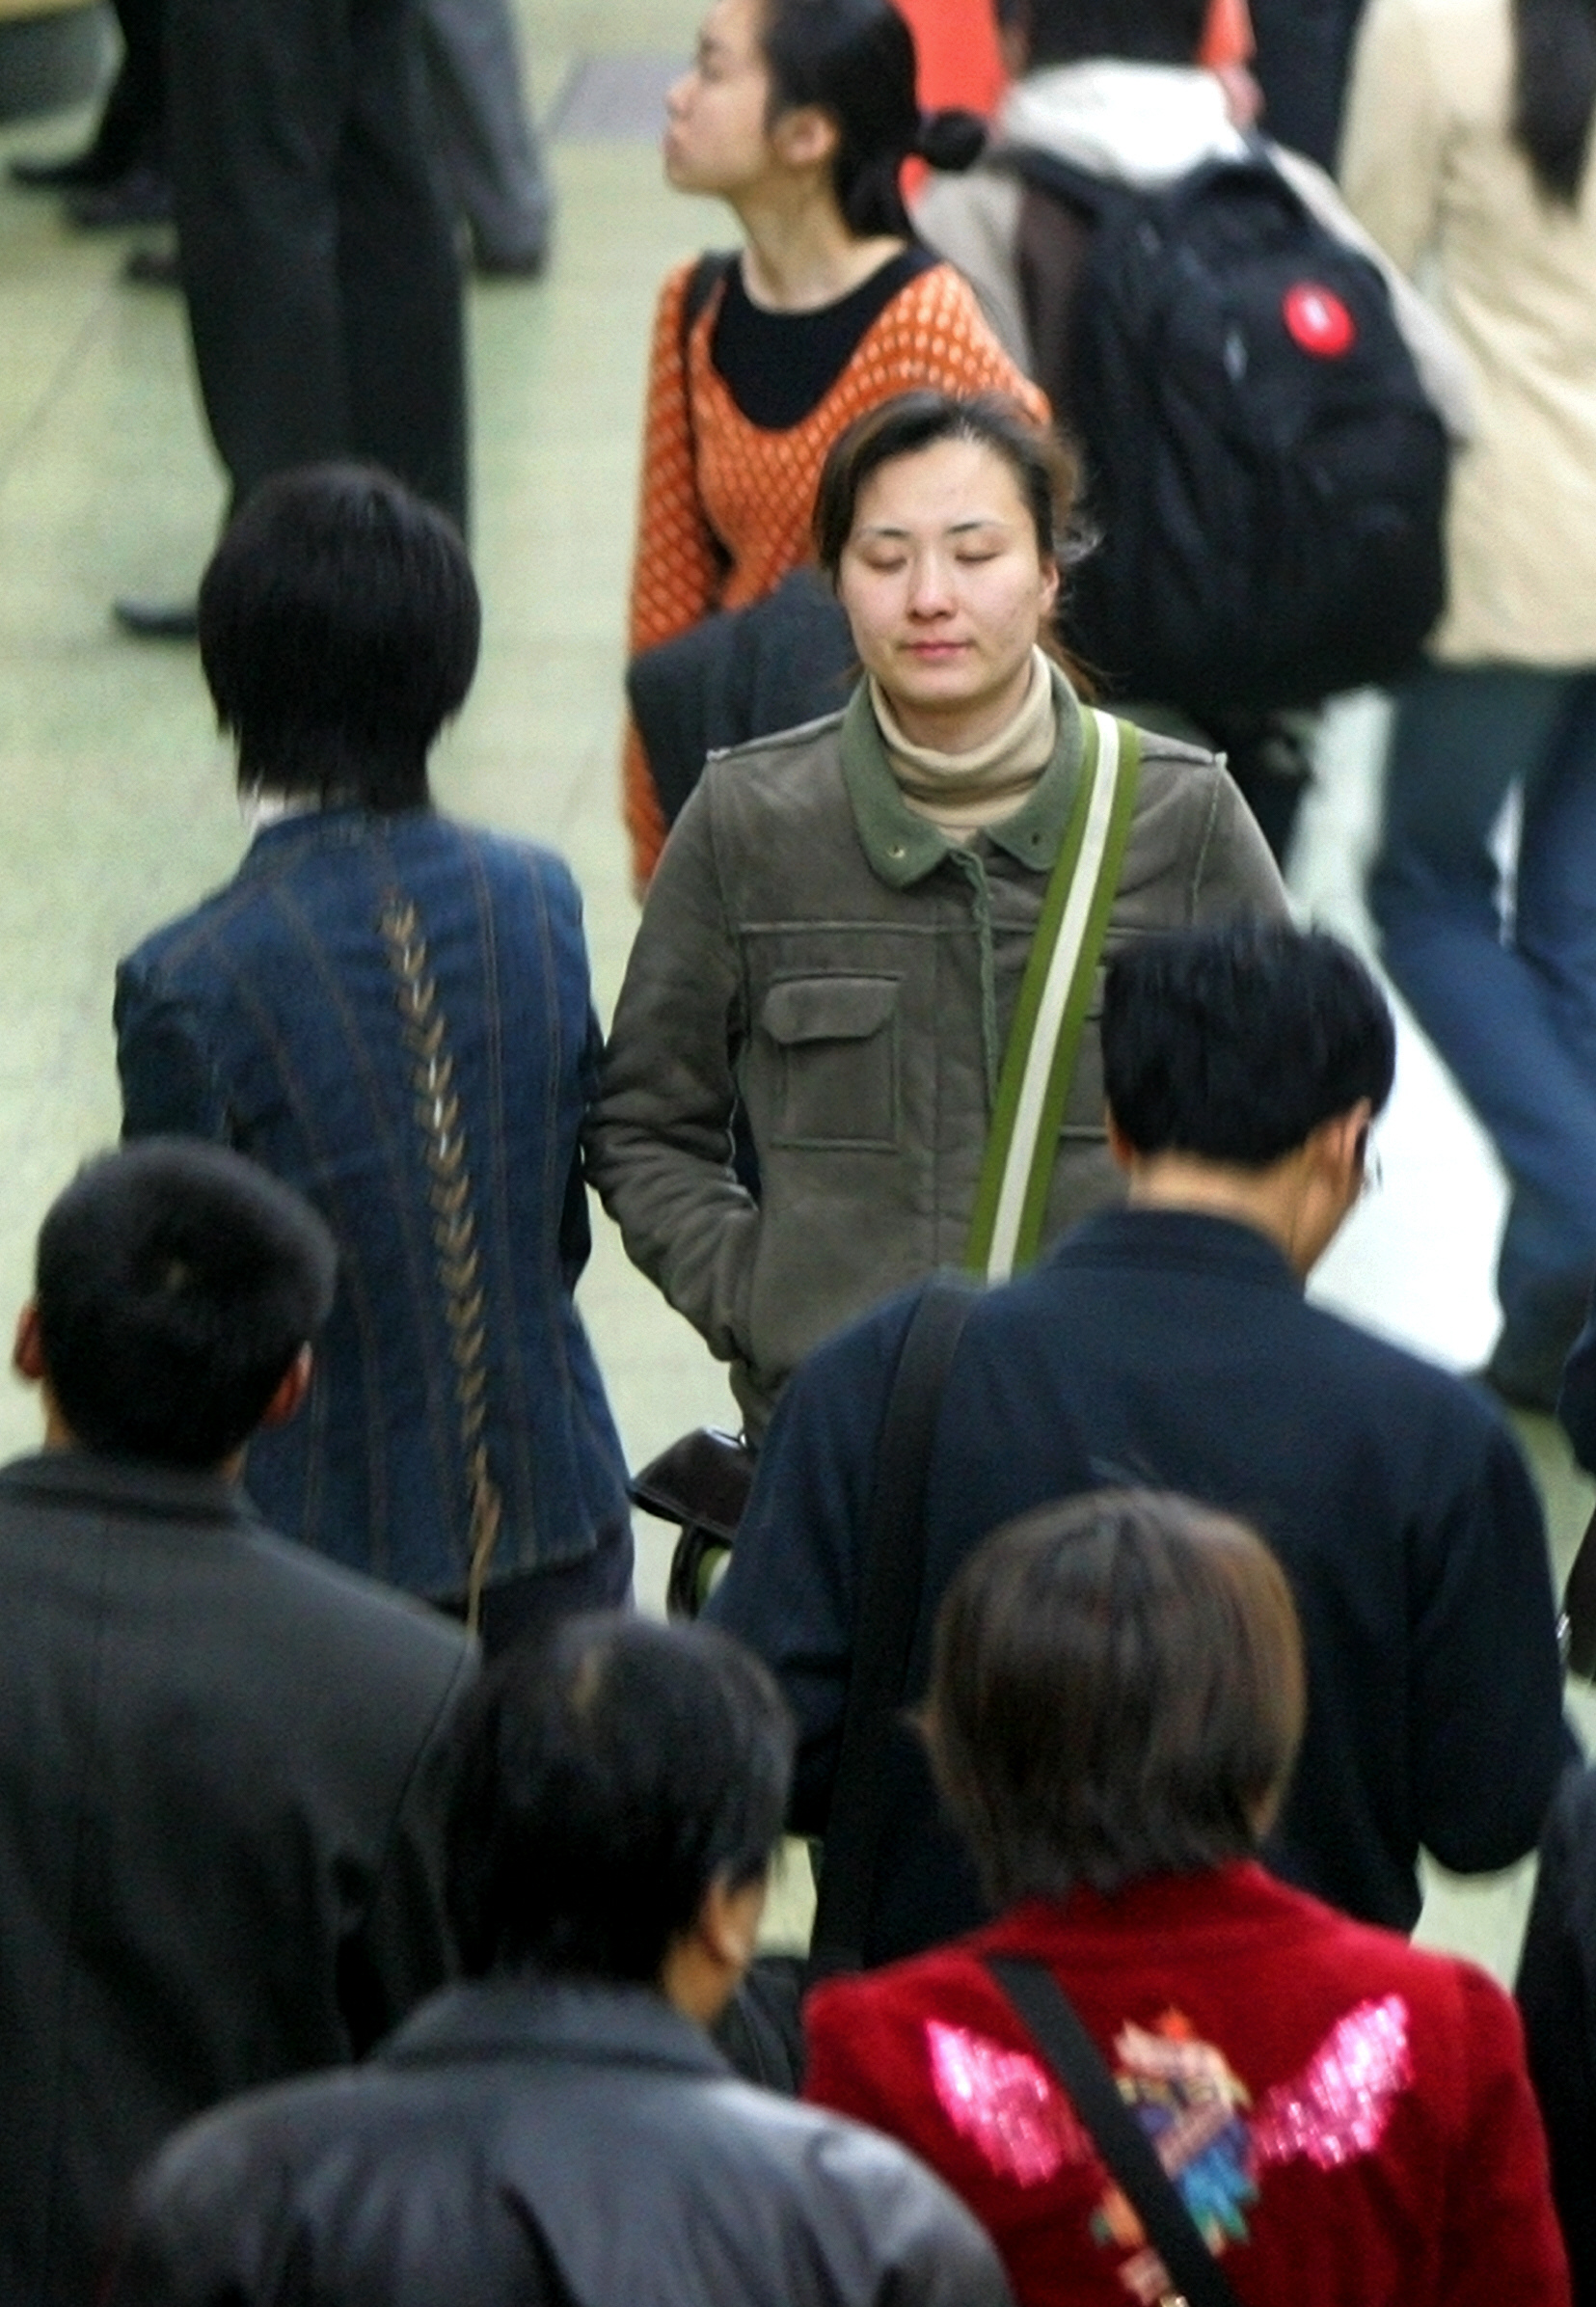 FILE PHOTO: A woman closes her eyes as pedestrians walk through a Beijing subway station, 01 April 2005. An estimated 100 million people, or eight percent of China's population, suffer from depression and most of them have received no treatment, state media reported. Experts say depression is one of China's most serious health threats, with a lack of public awareness and few services available to people who need treatment.  AFP PHOTO/Frederic J. BROWN / AFP PHOTO / FREDERIC J. BROWN